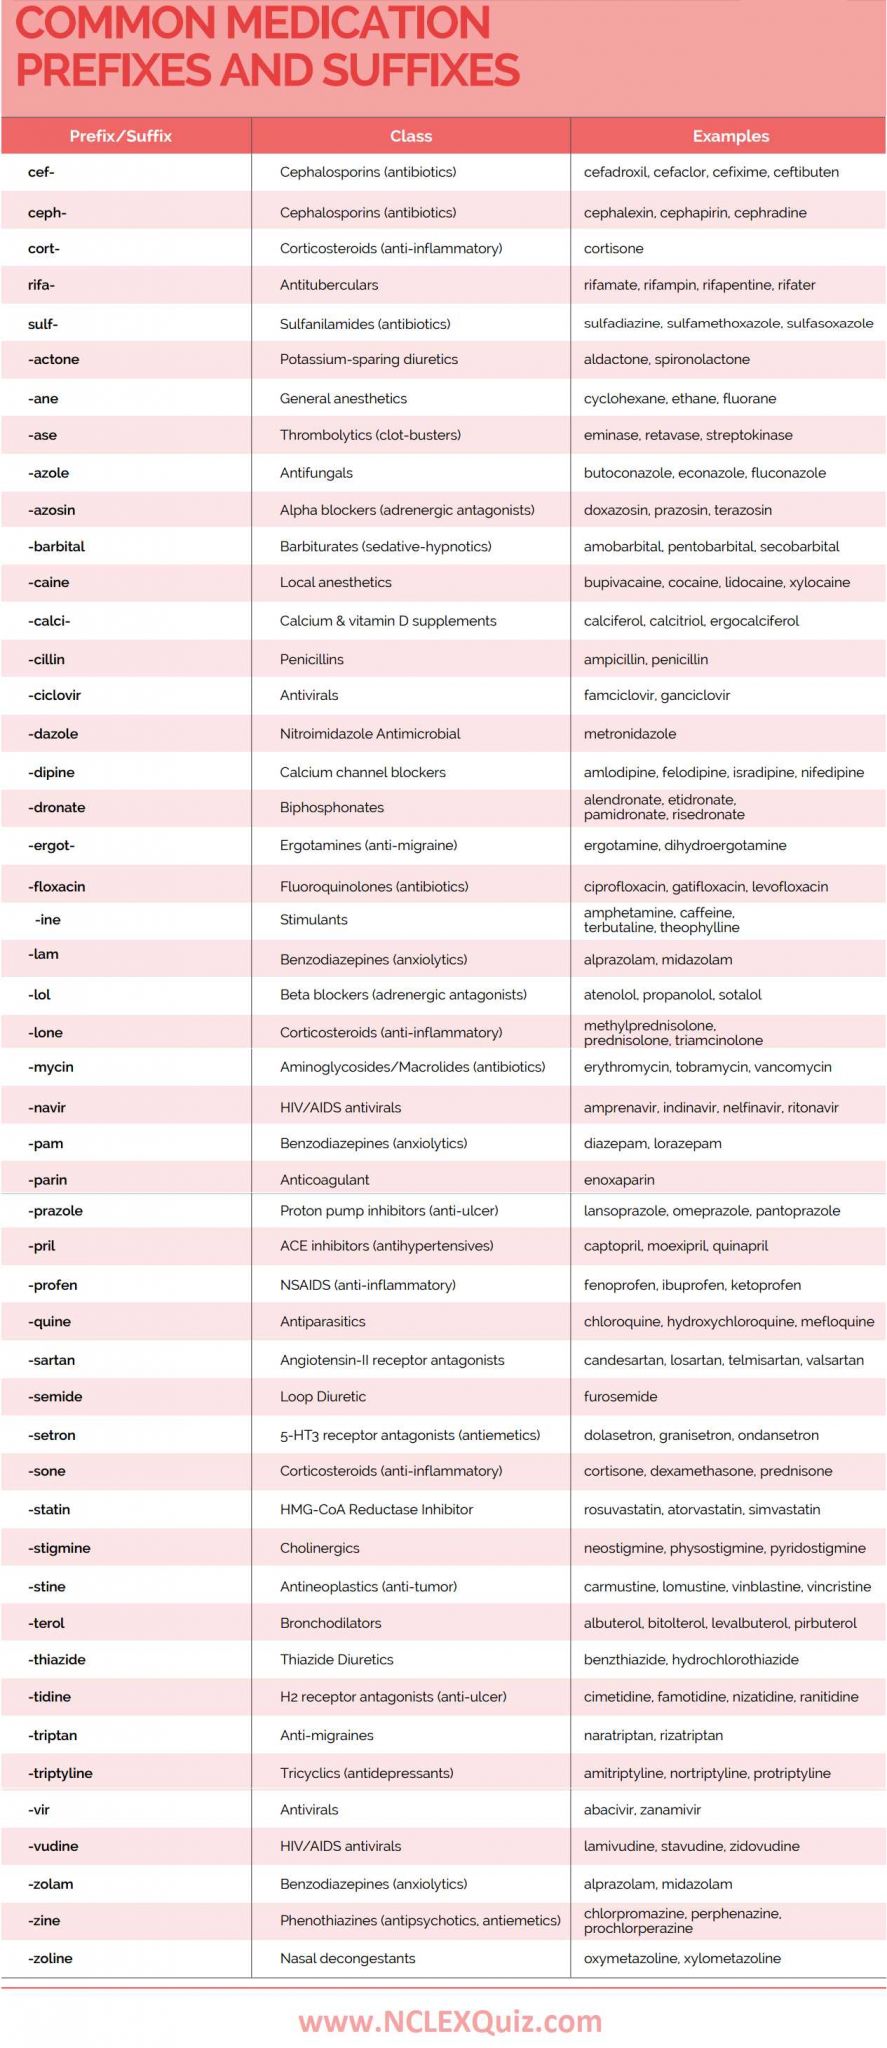 Prefix and Suffix Worksheets Pdf as Well as Mon Medication Prefixes and Suffixes Pinterest